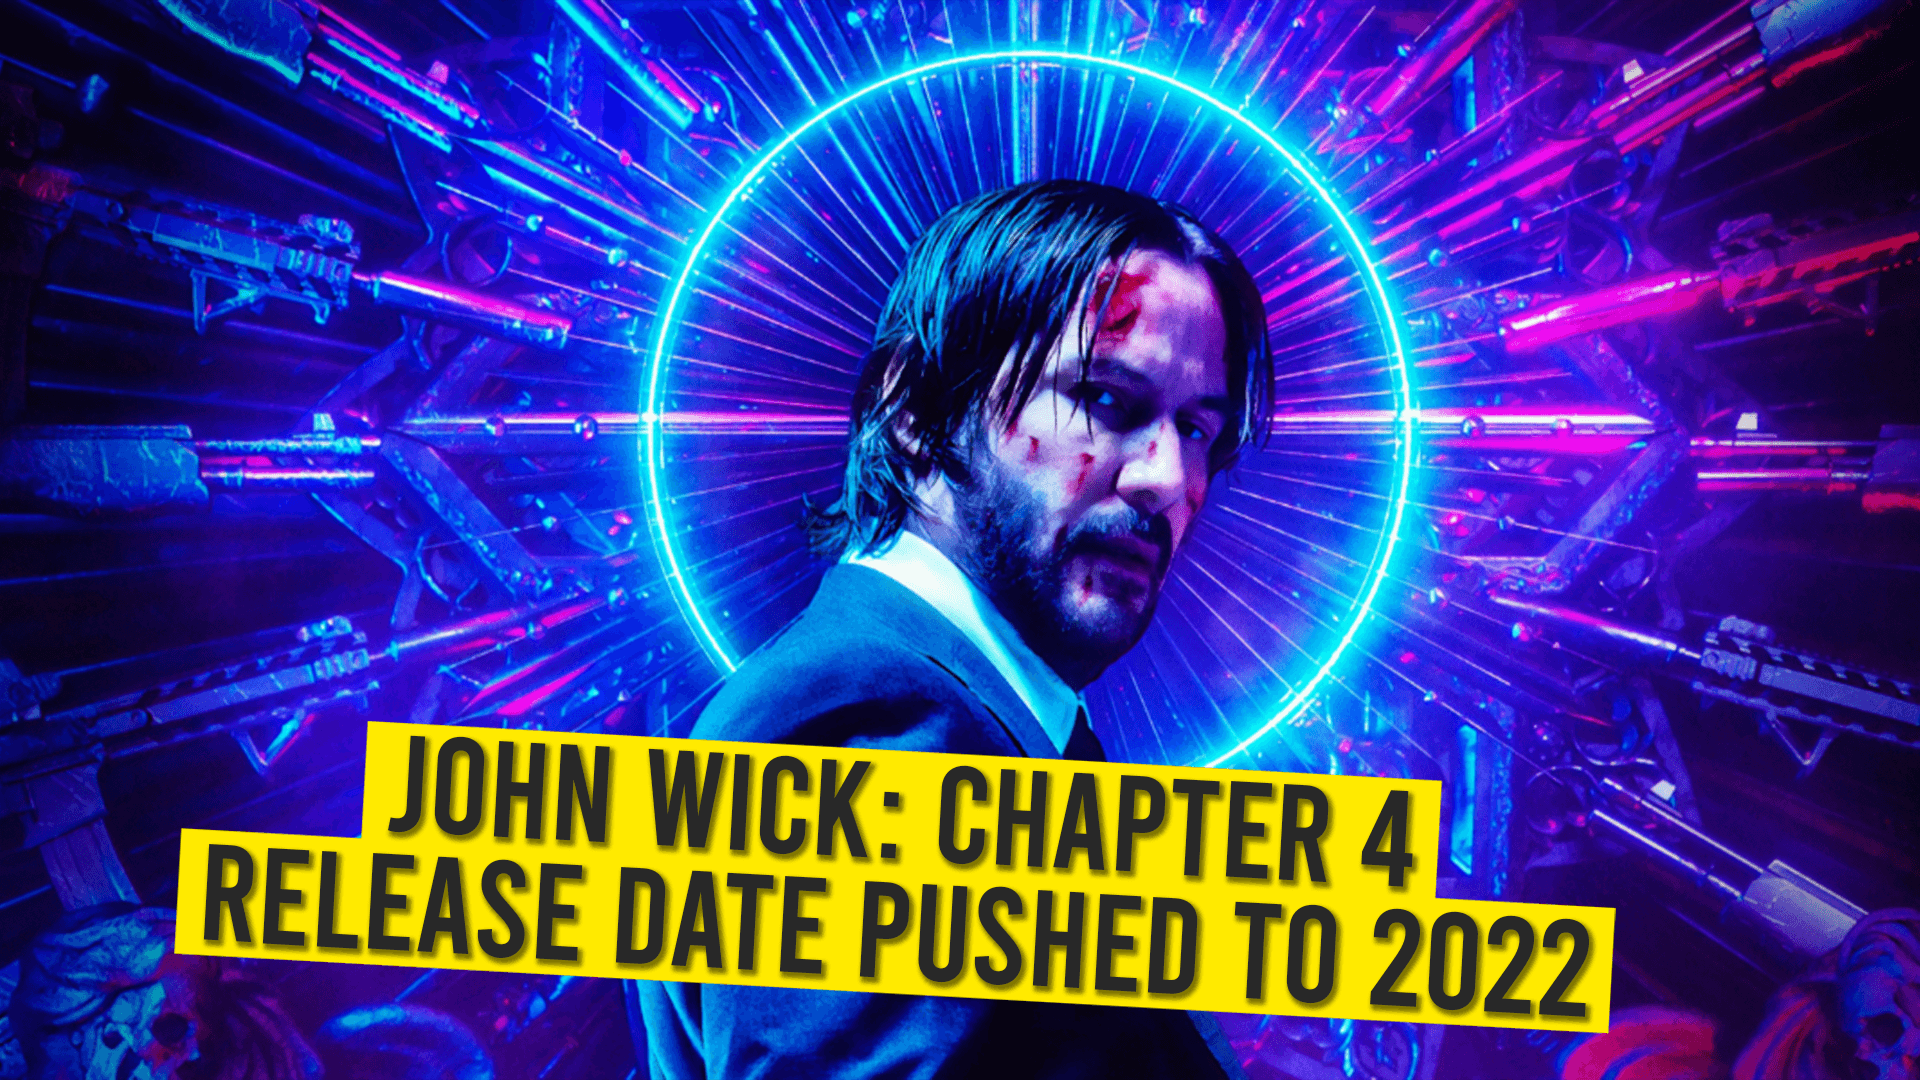 John Wick: Chapter 4 Release Date Pushed To 2022